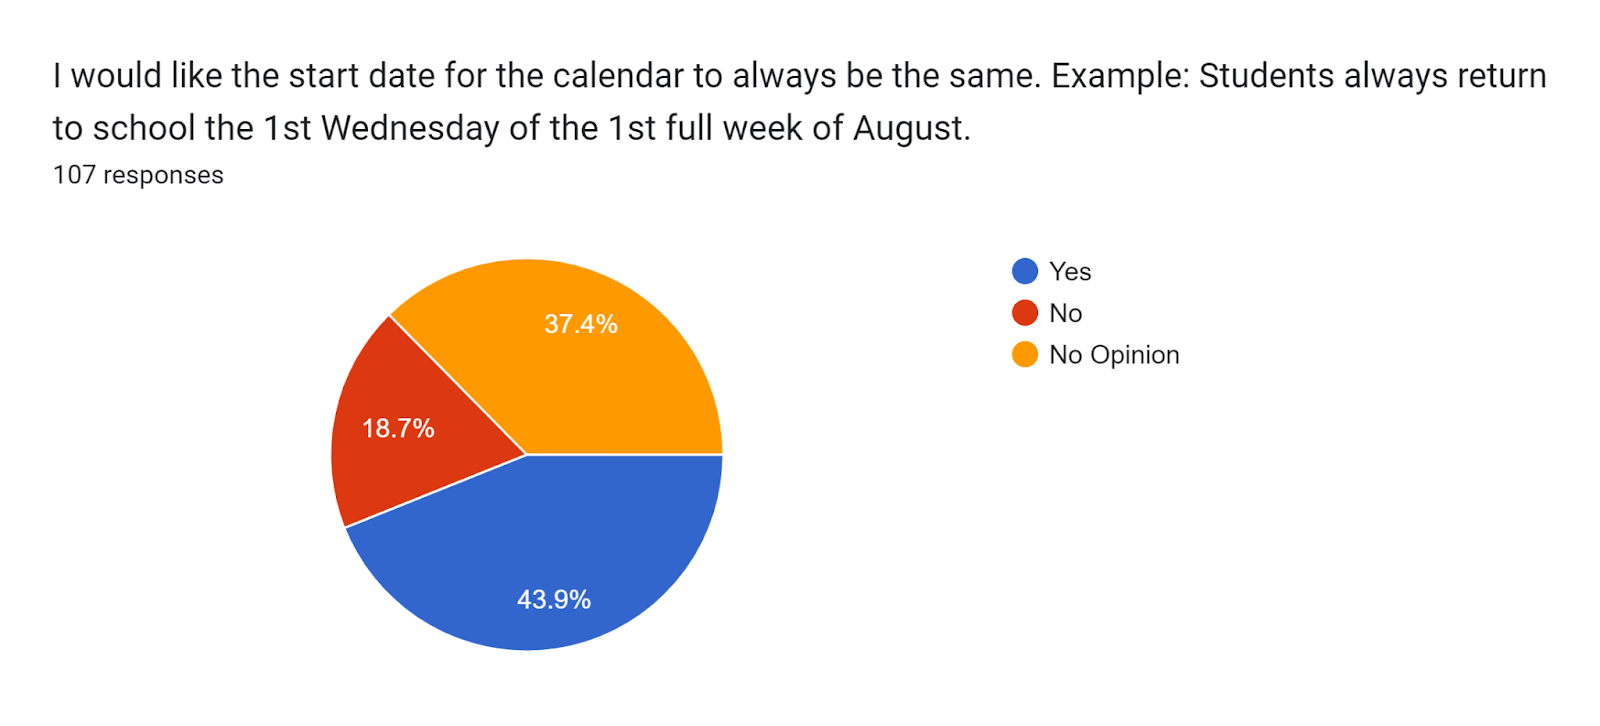 Forms response chart. Question title: I would like the start date for the calendar to always be the same. Example: Students always return to school the 1st Wednesday of the 1st full week of August. . Number of responses: 107 responses.